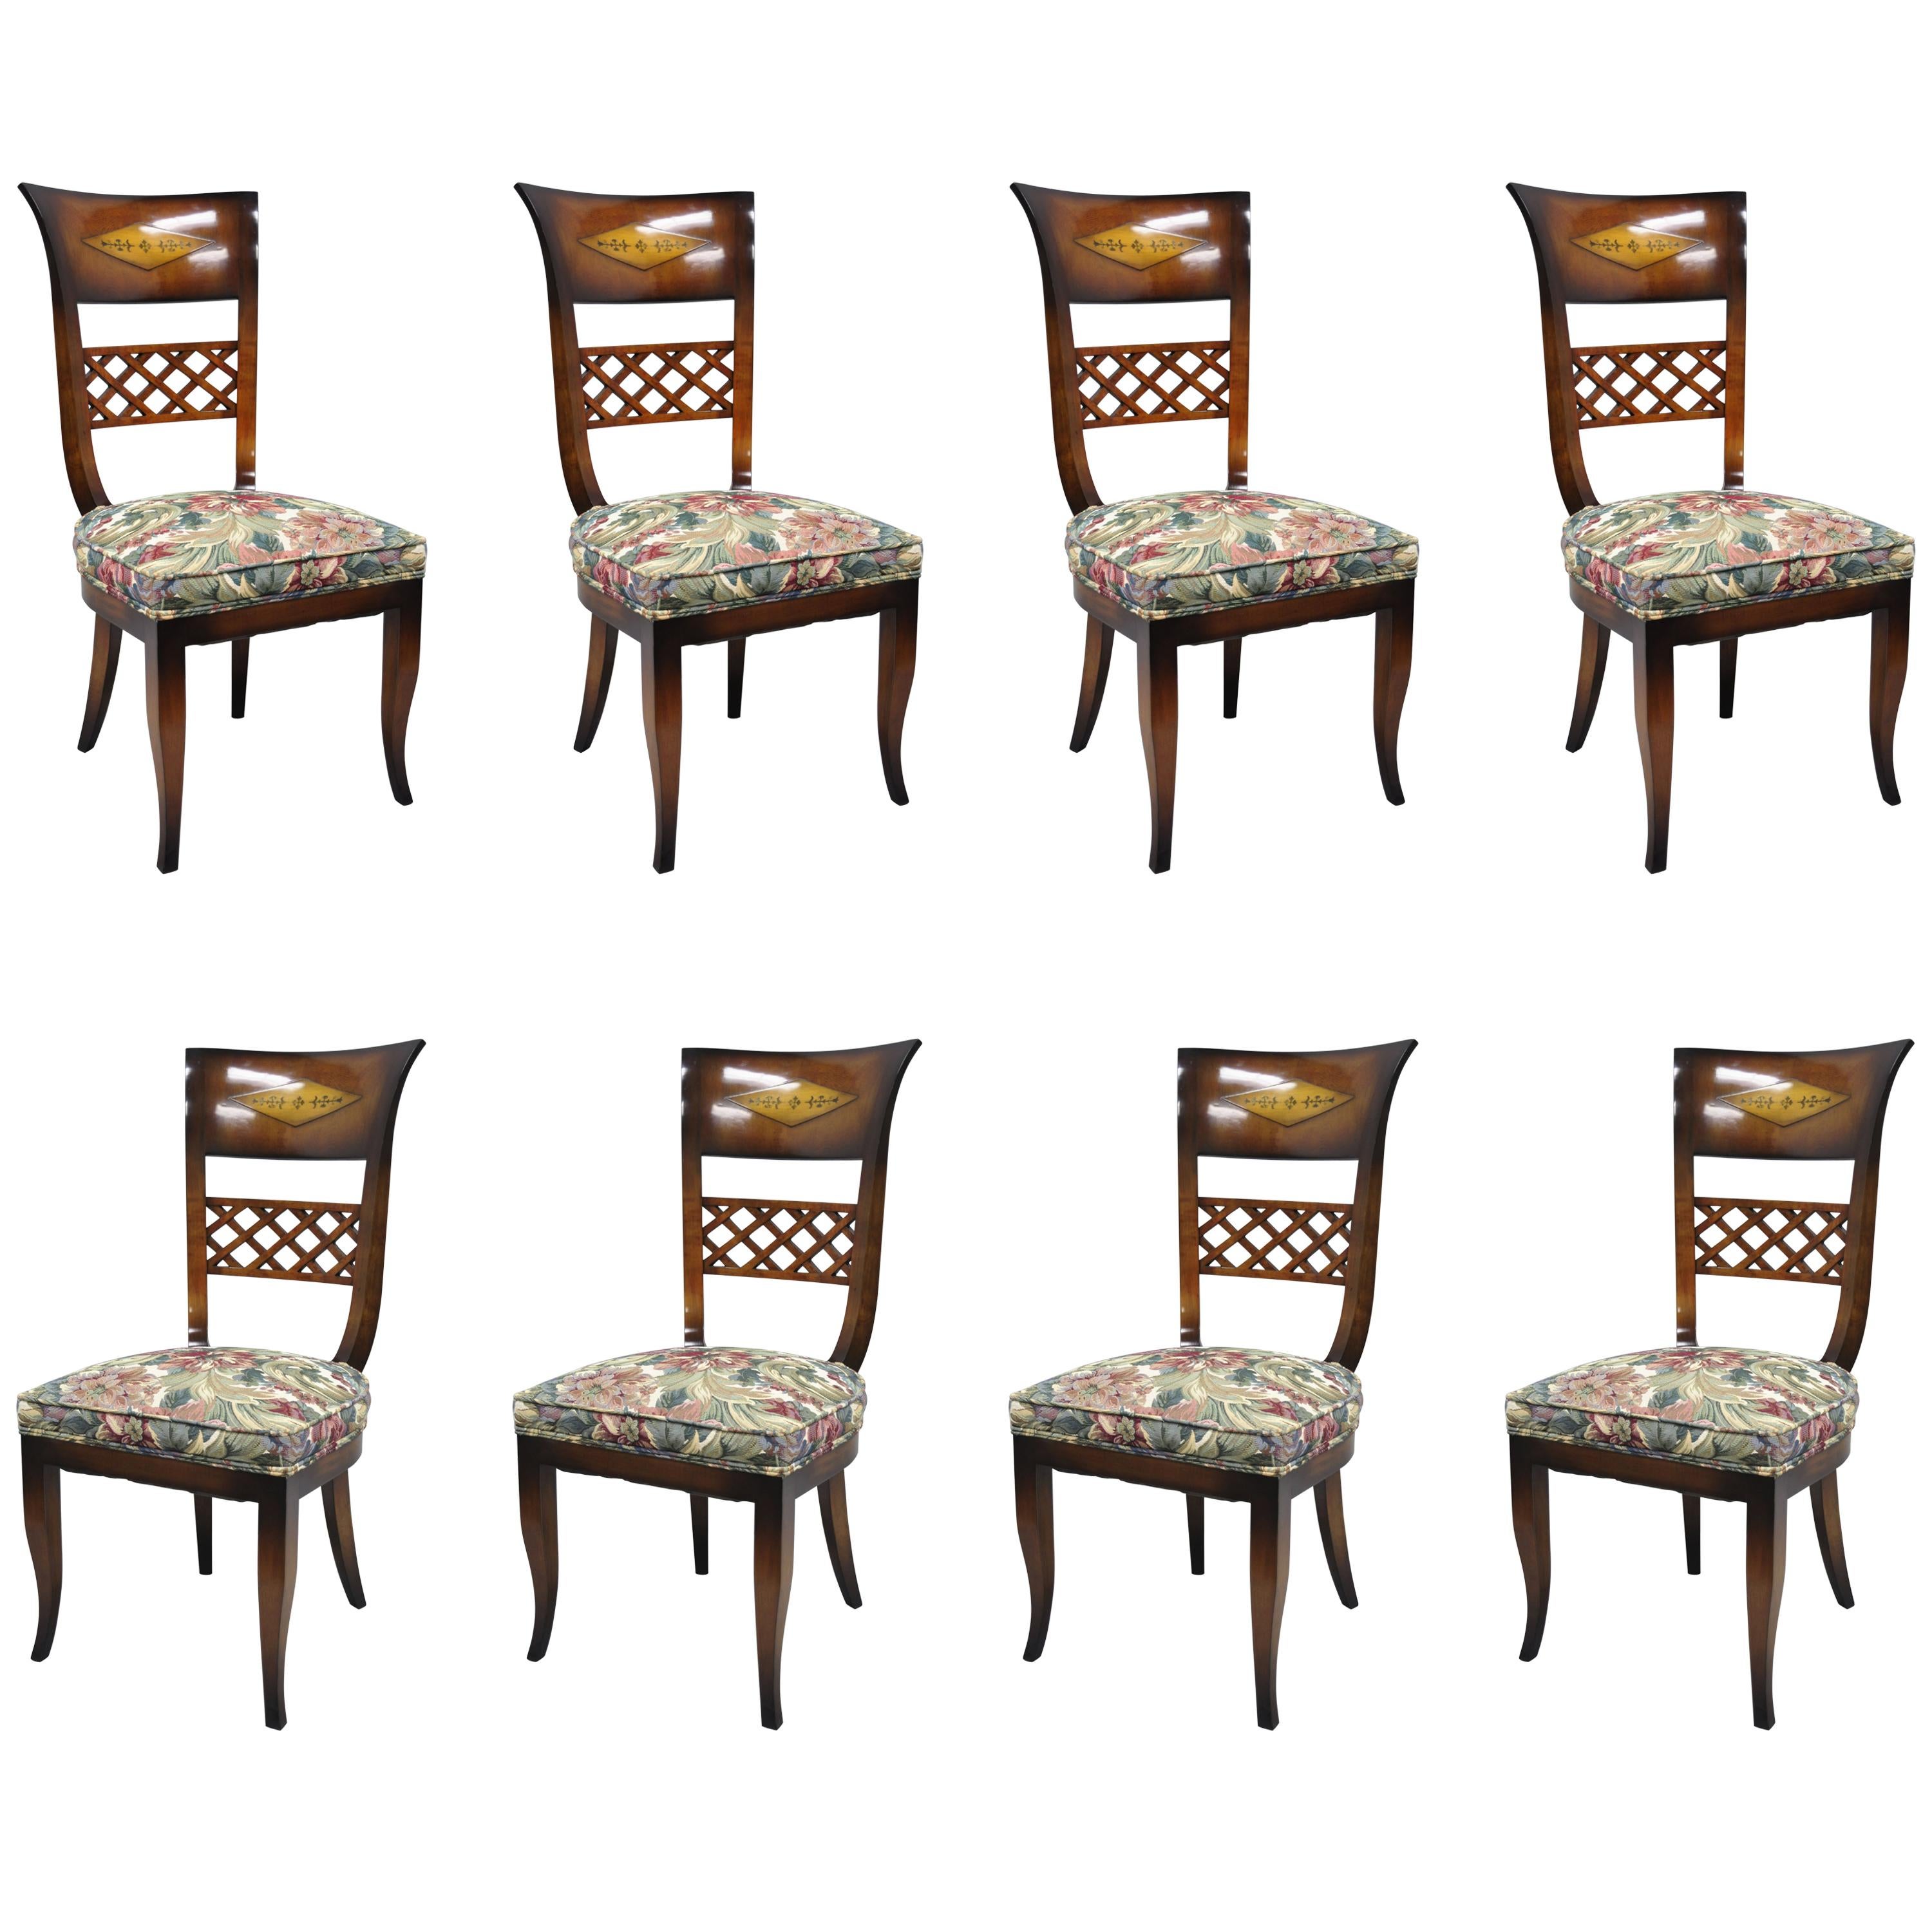 8 Italian Neoclassical Style High Back Lattice and Brass Inlay Dining Chairs